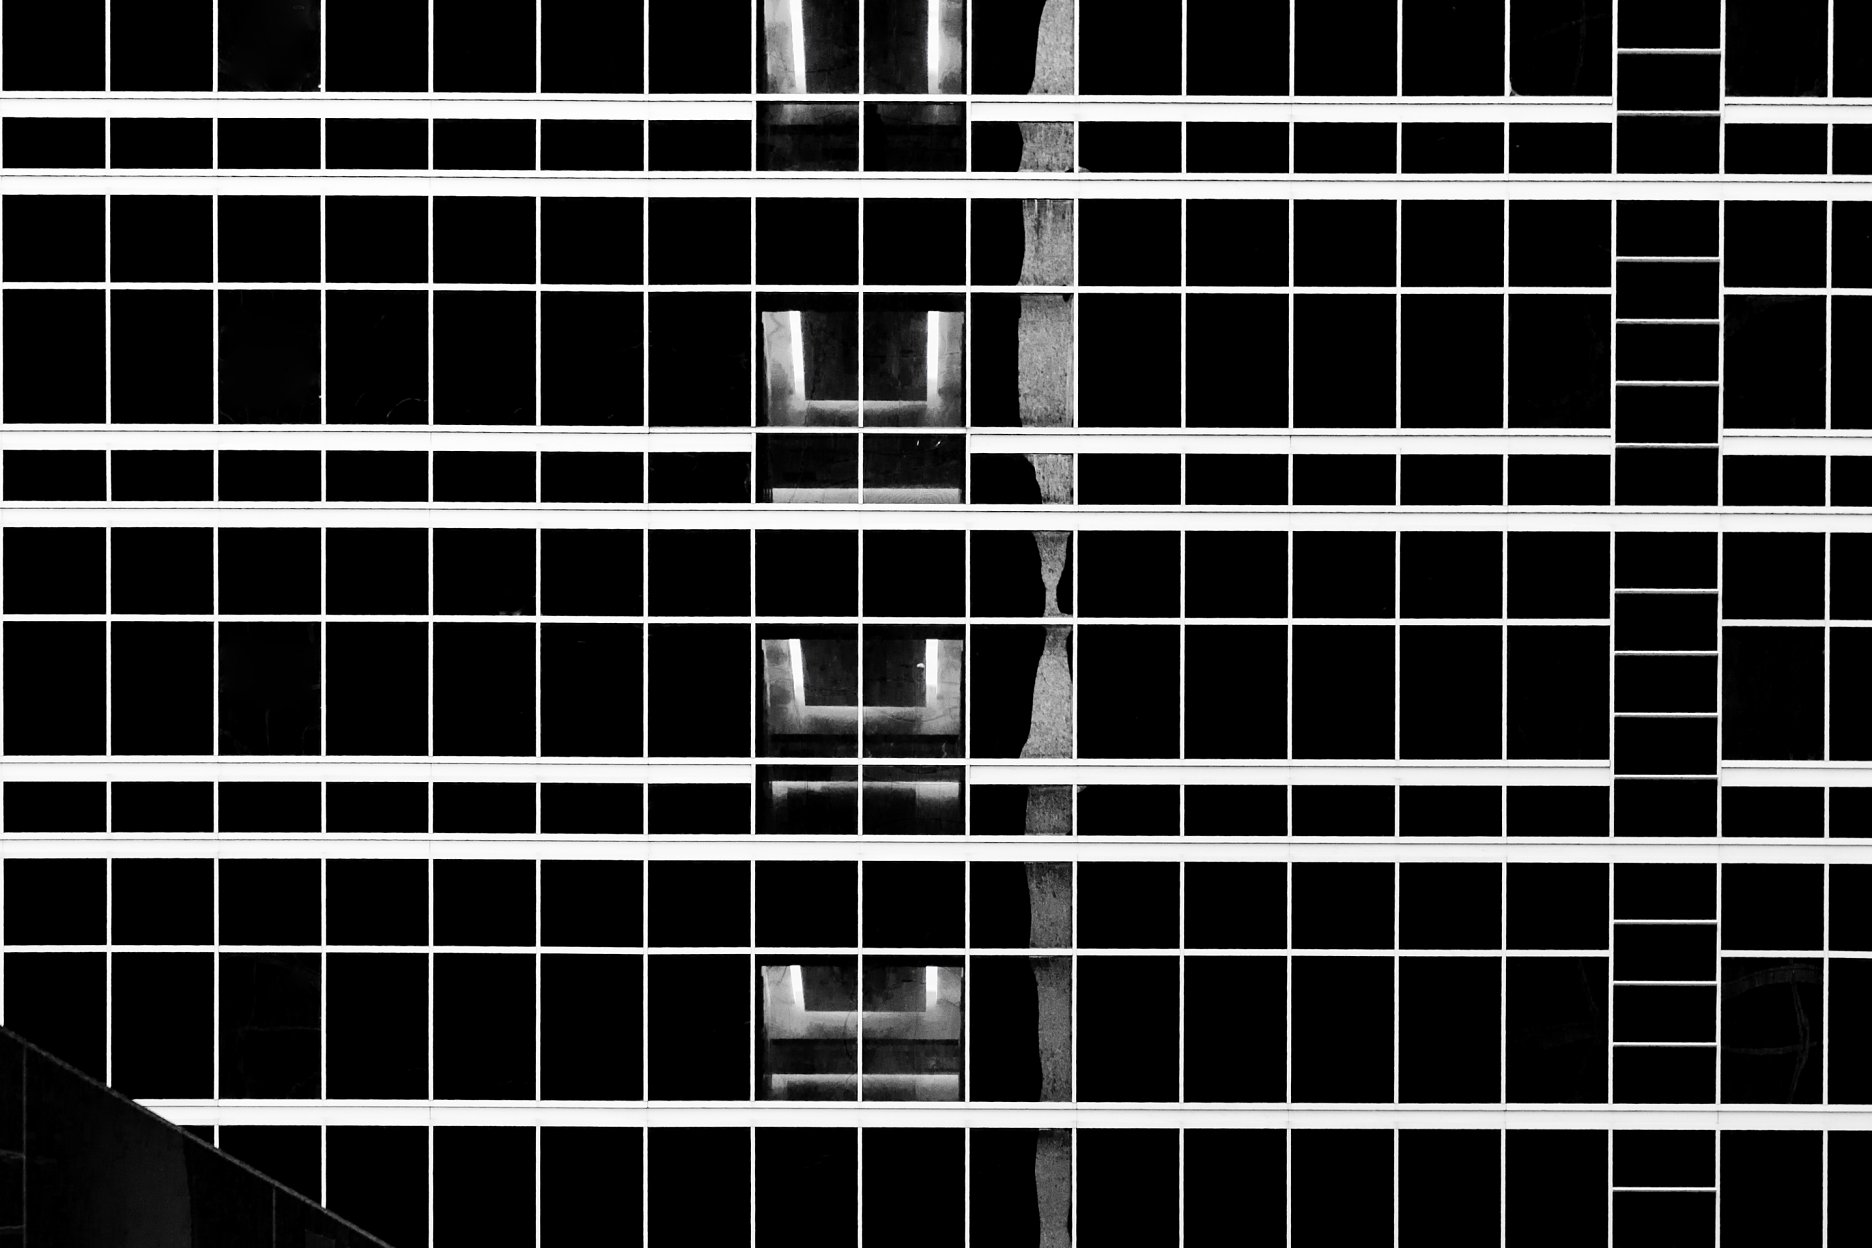 The Grid, City of Capitals, Moscow, 2017 